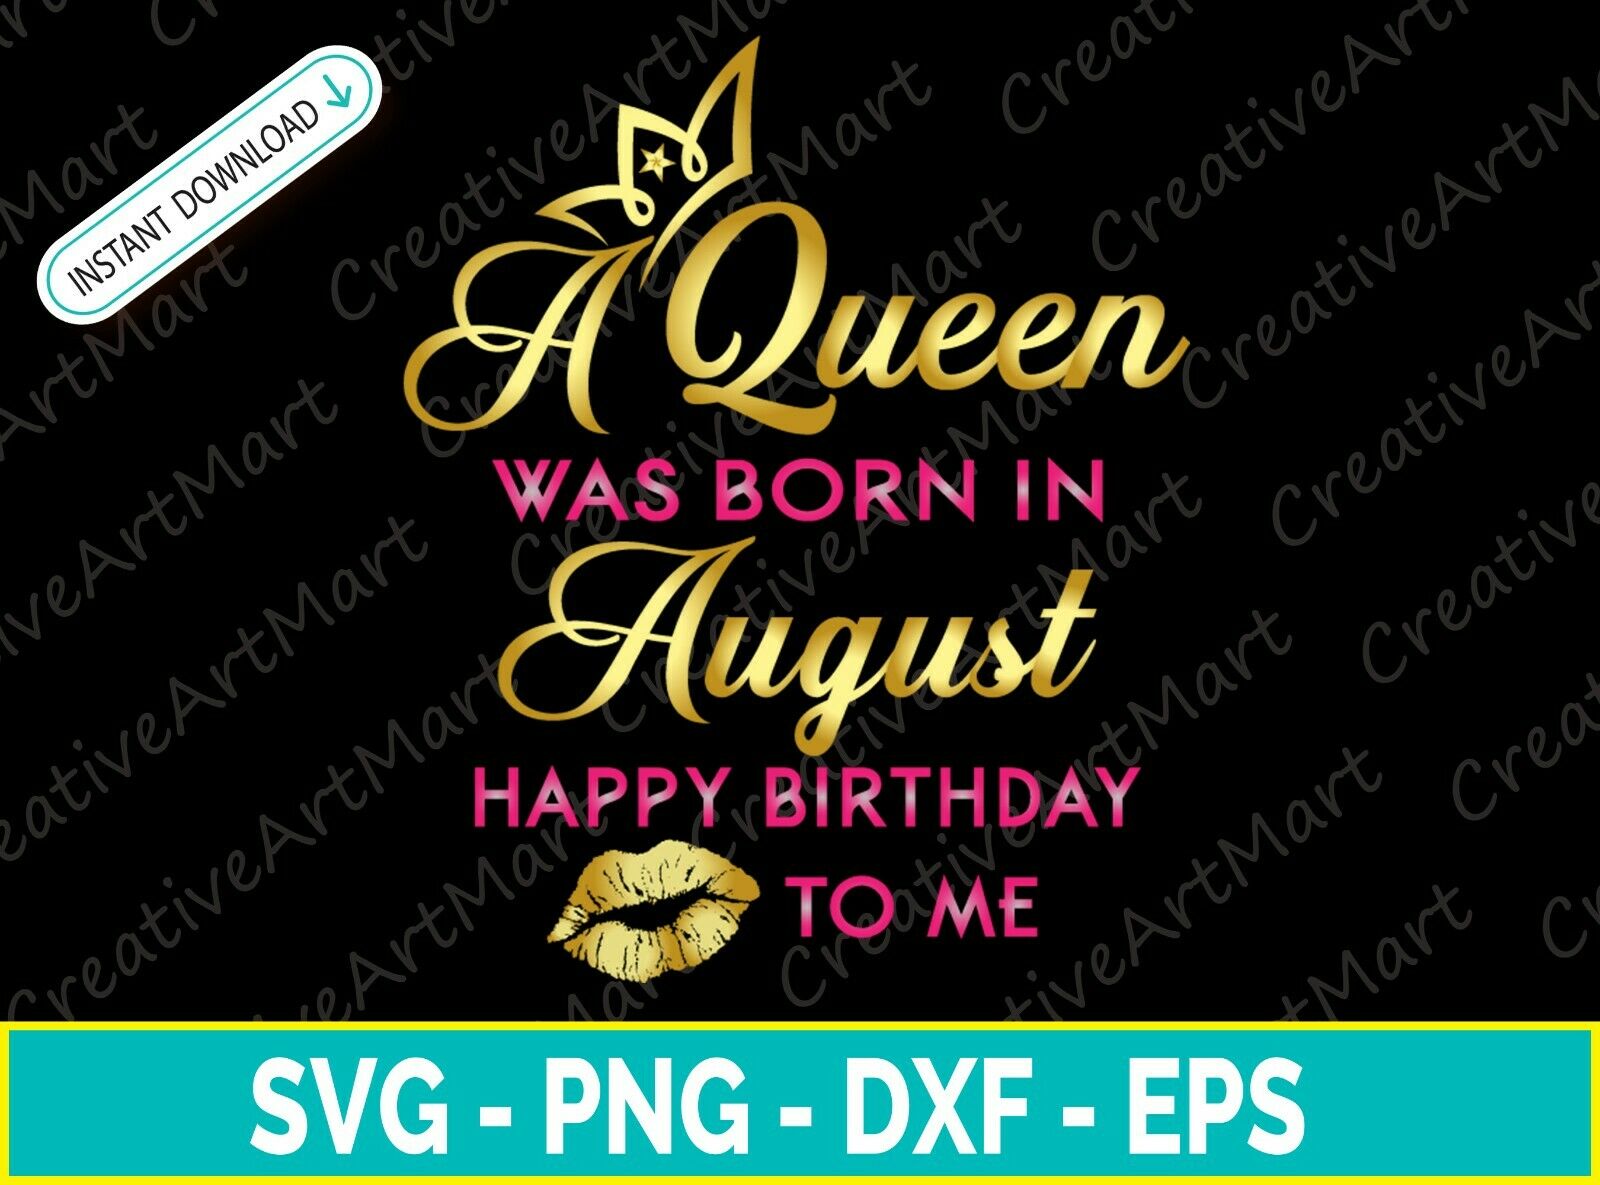 Born In August - Birthday August - Digital Design - Download Within 24 Hours.